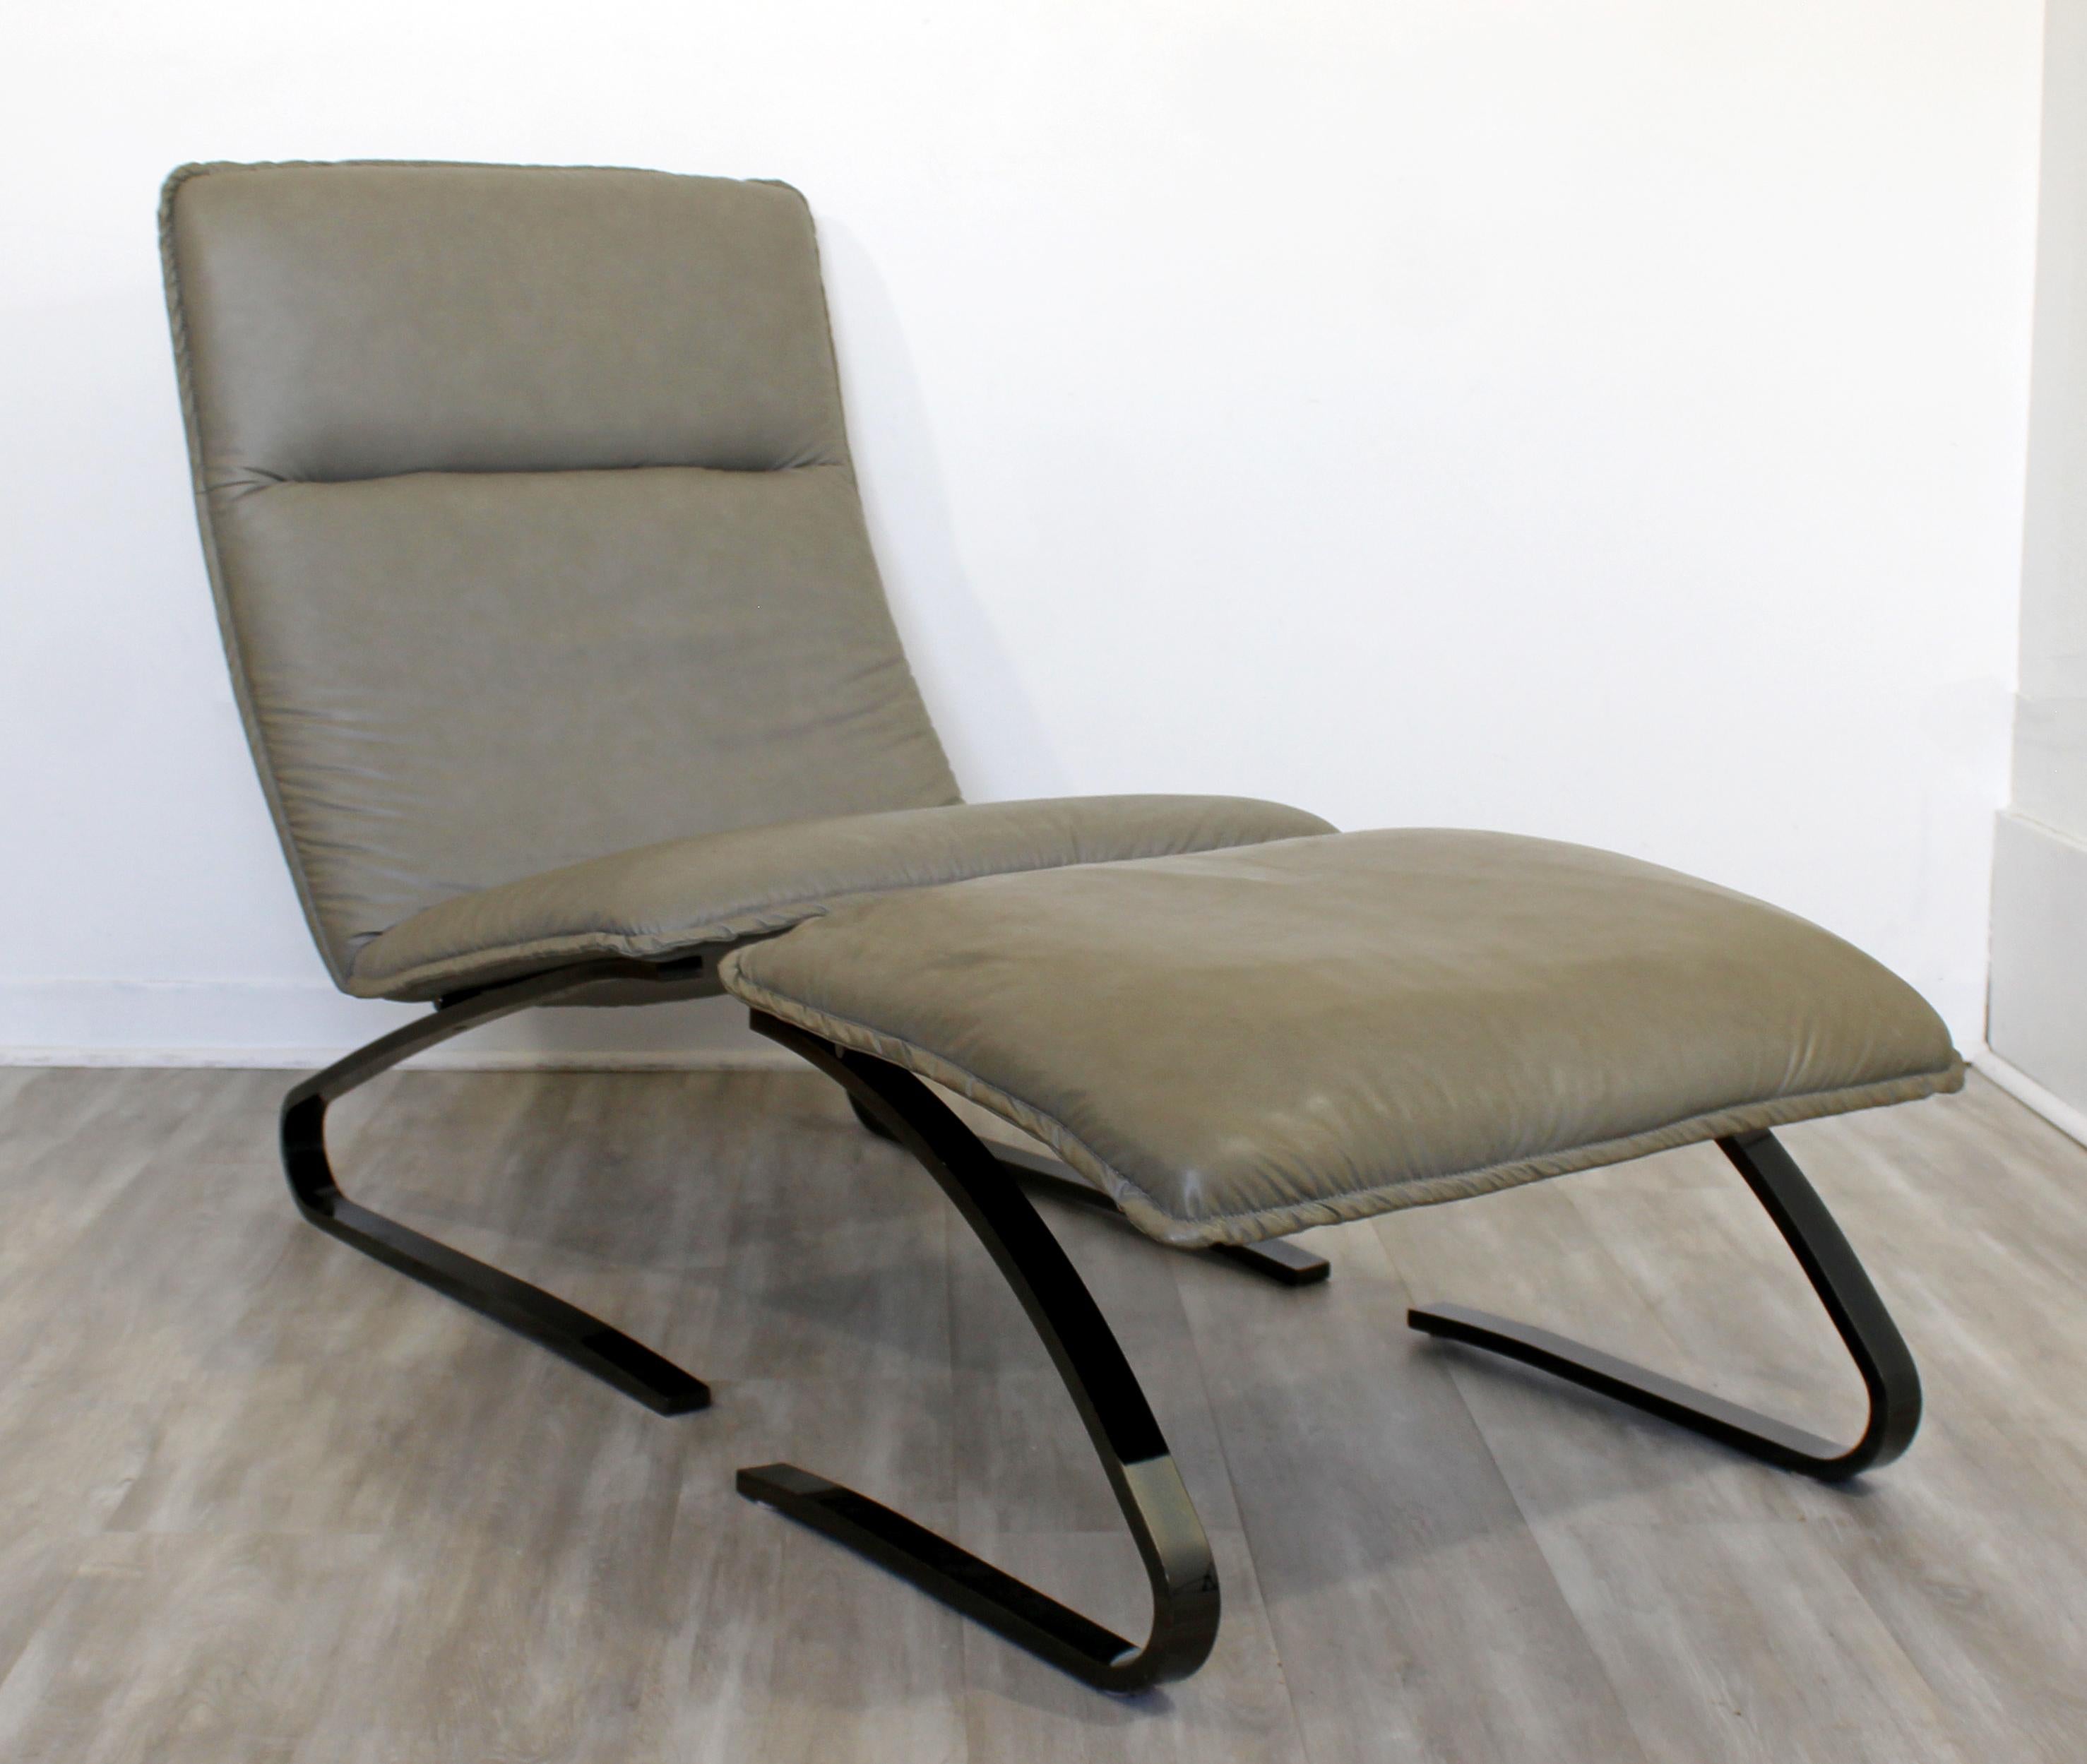 For your consideration is a luxurious, gray leather upholstered lounge chair on a gummetal base, with a matching ottoman, by The Design Institute of America, circa 1990s. In excellent condition, with slight wear to the upholstery. The dimensions of